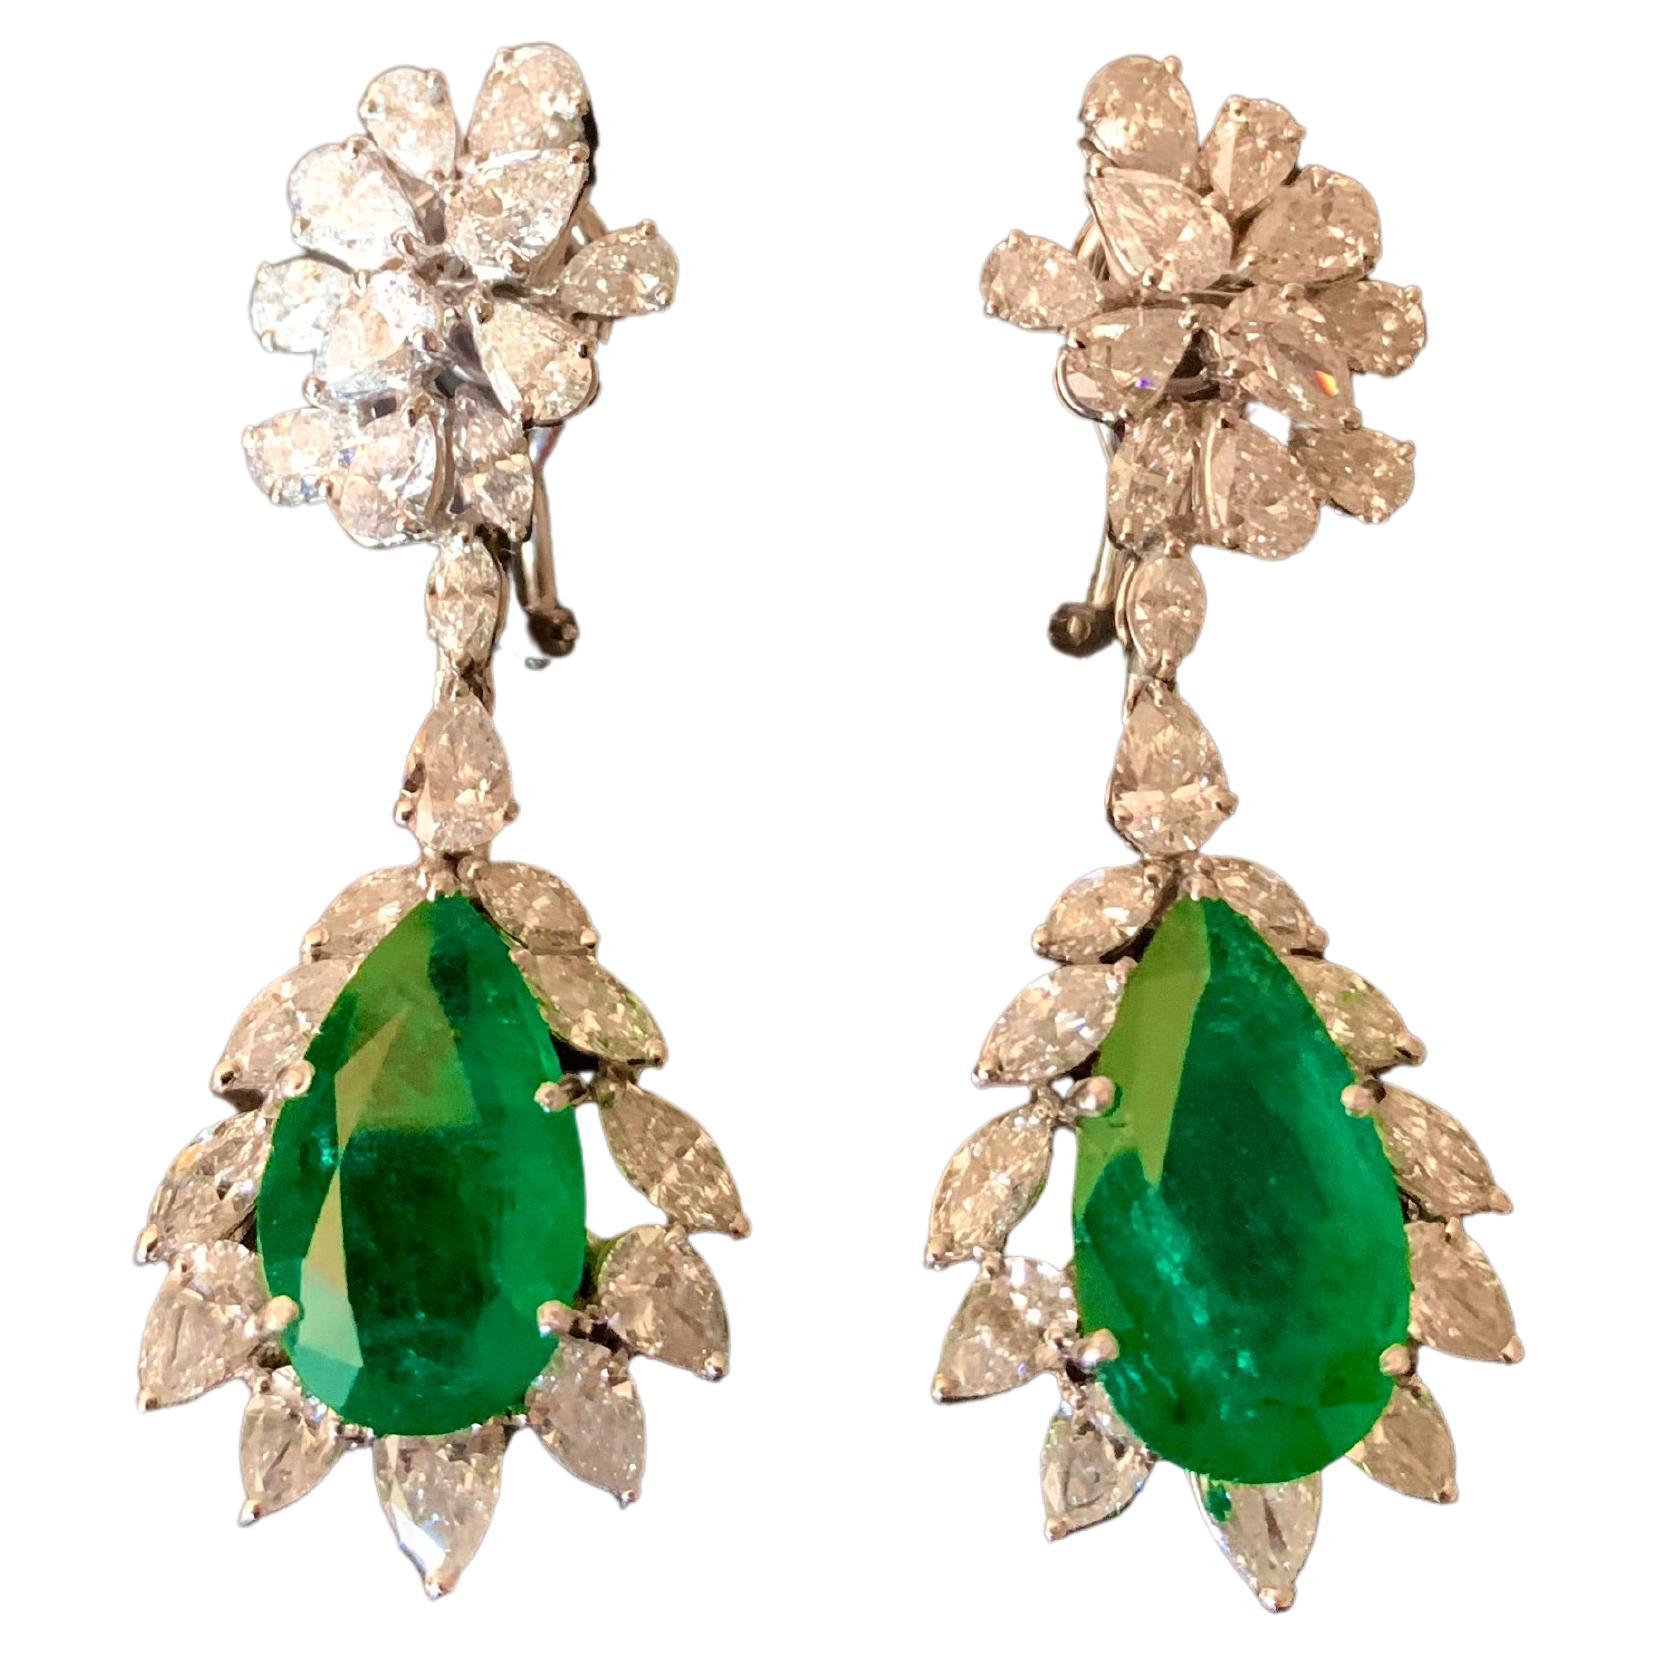 Pear-Cut Emerald Earrings For Sale at 1stDibs